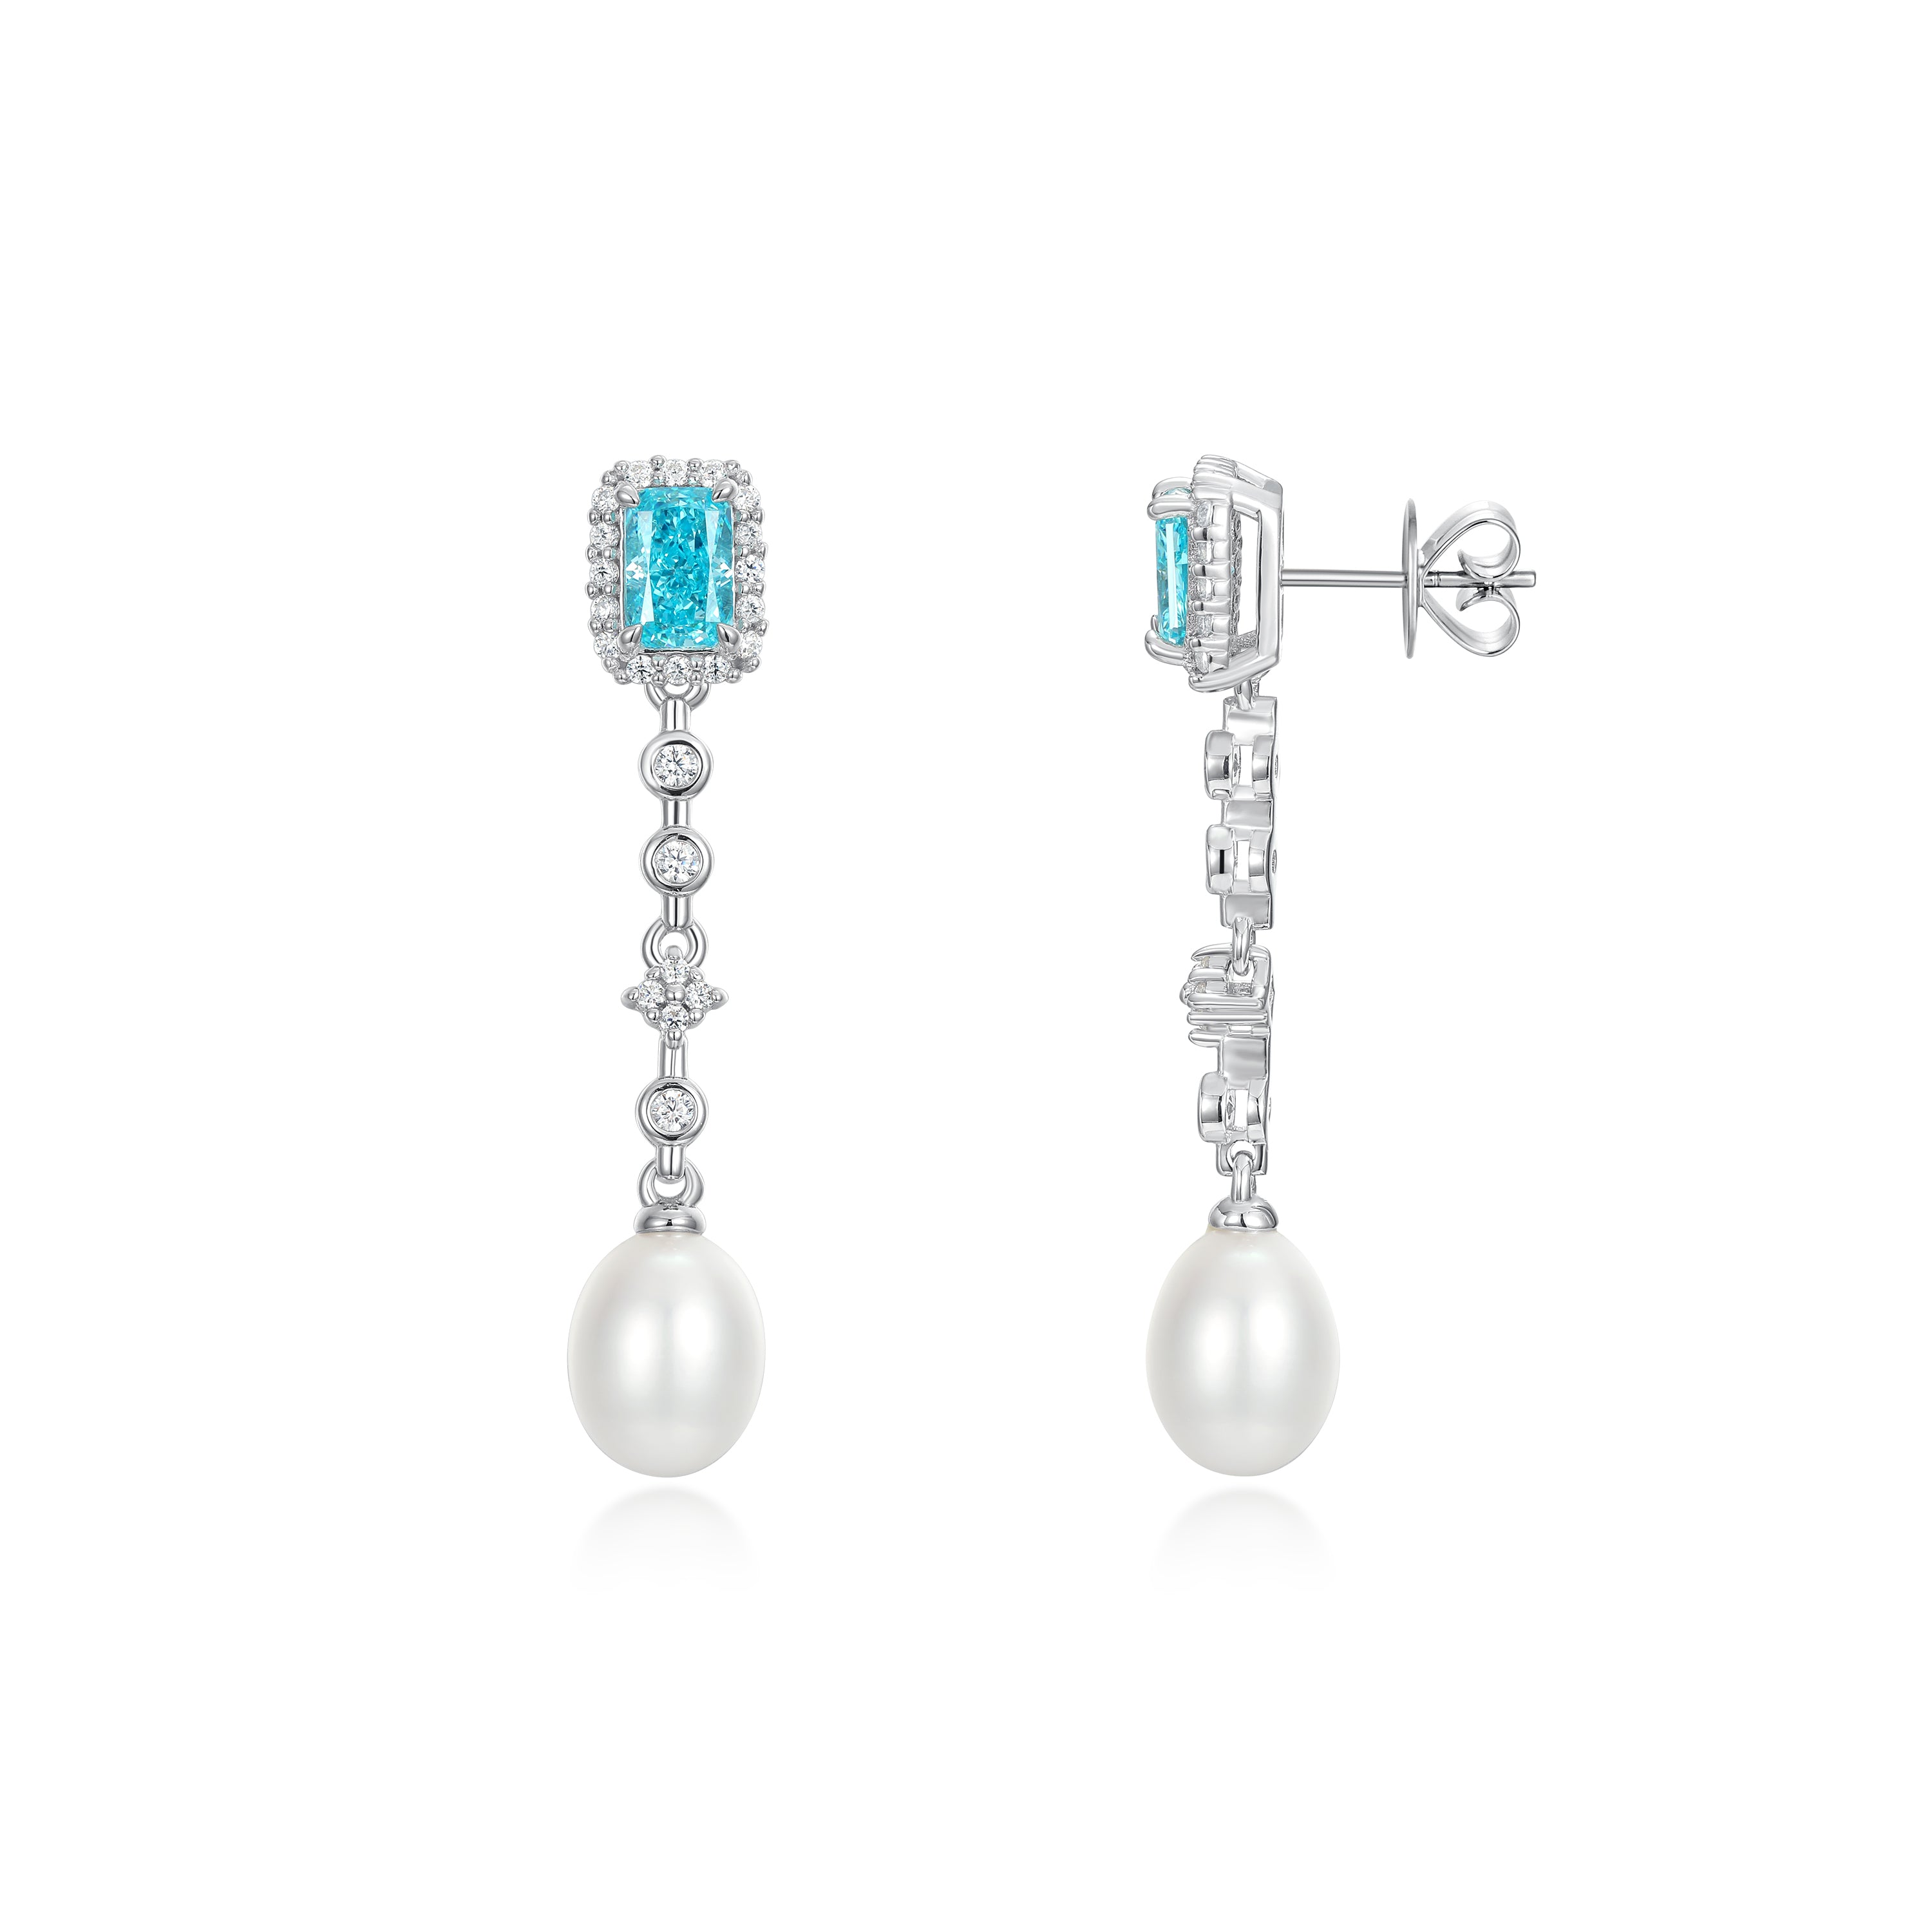 Pearl Drop and Blue Dangling Earrings - L'Amour Pearls